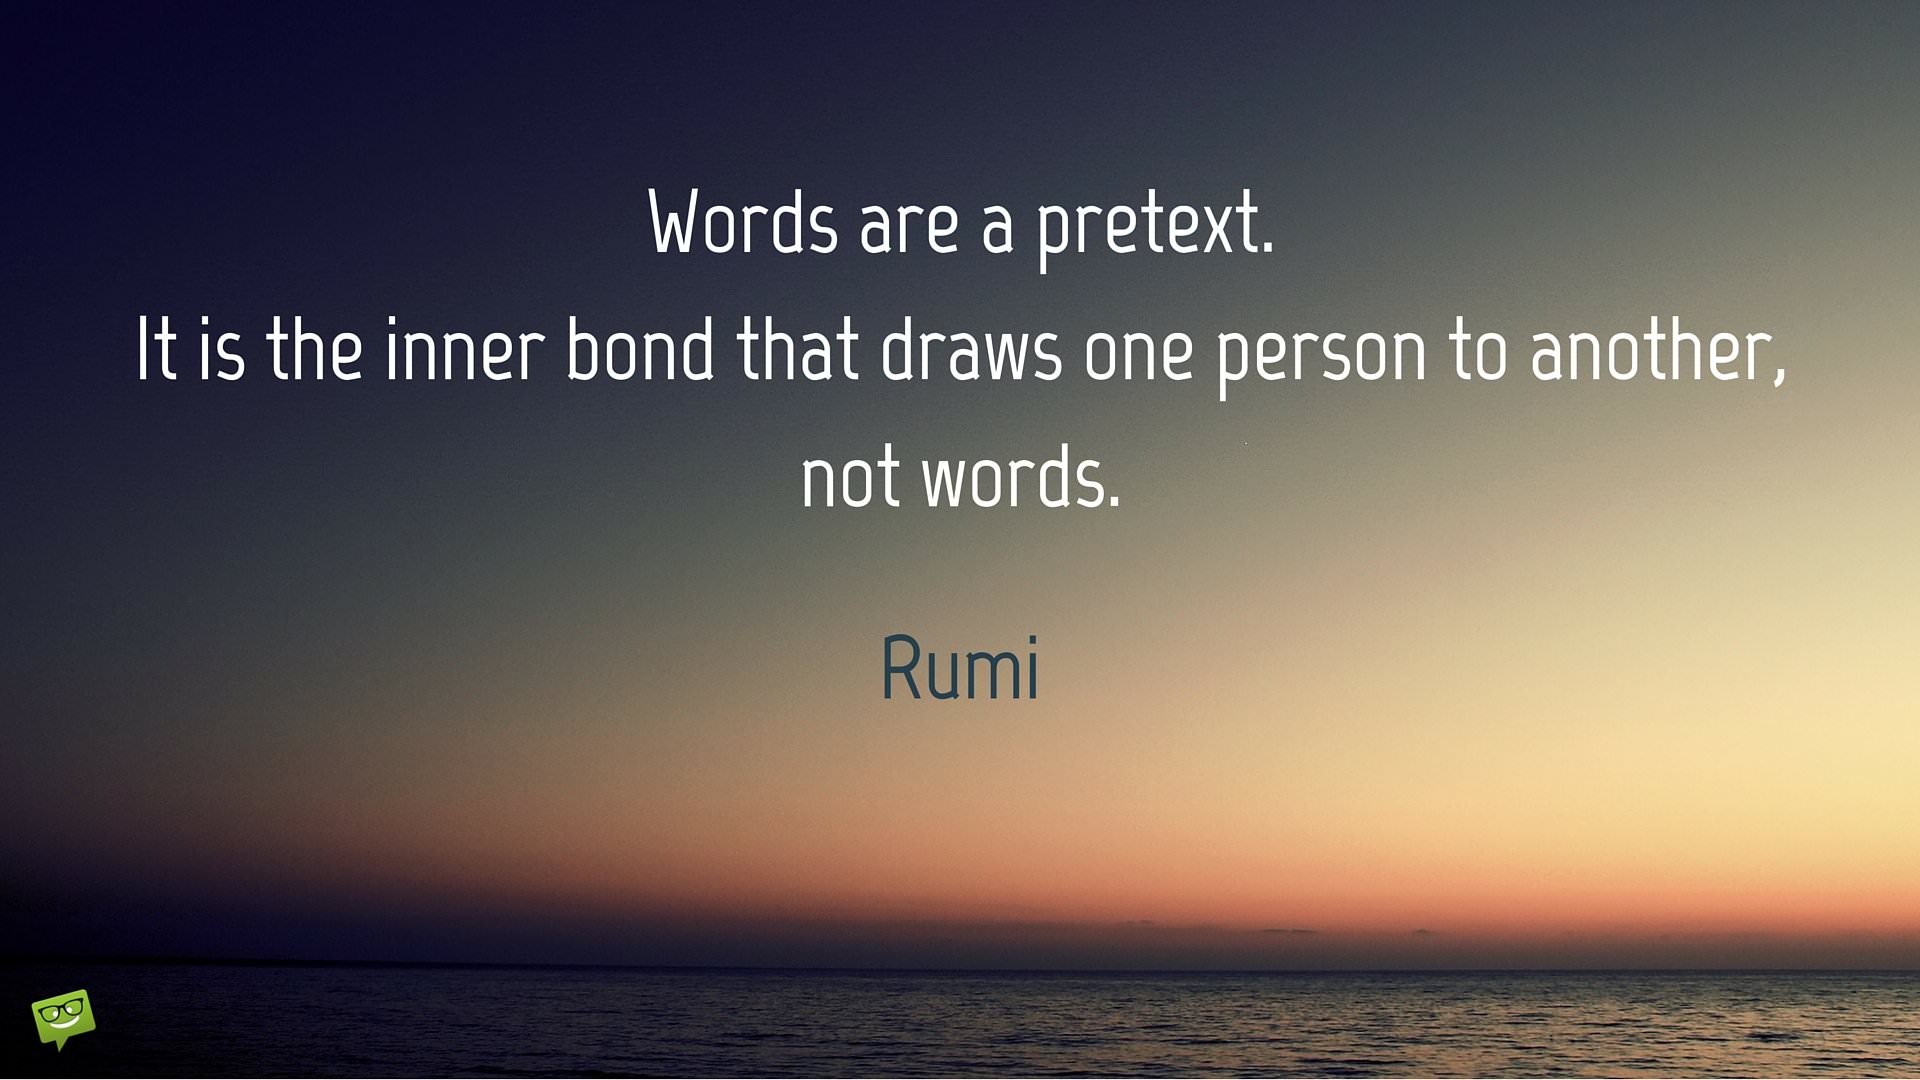 Rumi on Love! Read his Best Quotes on What Makes Us One